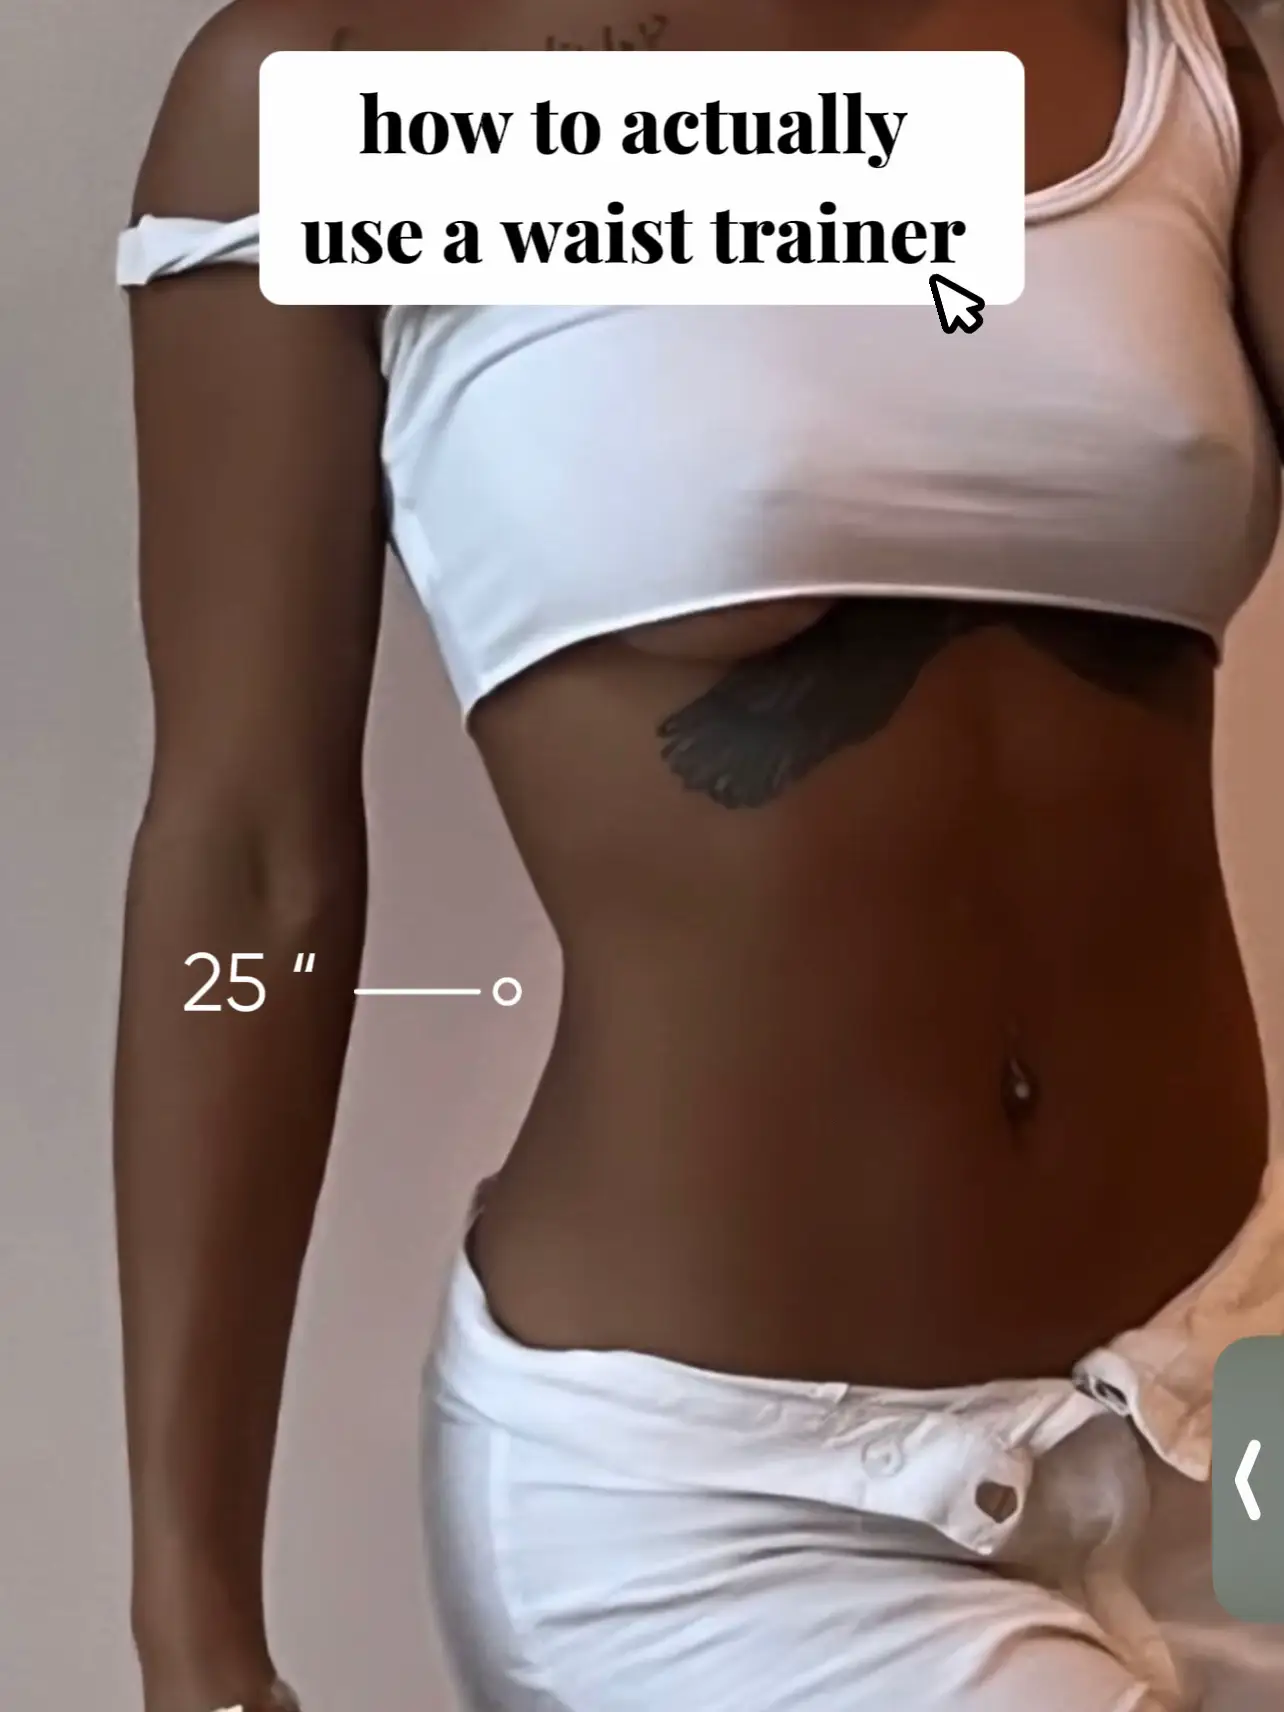 How To Measure Yourself for a Waist Trainer – SqueezMeSkinny